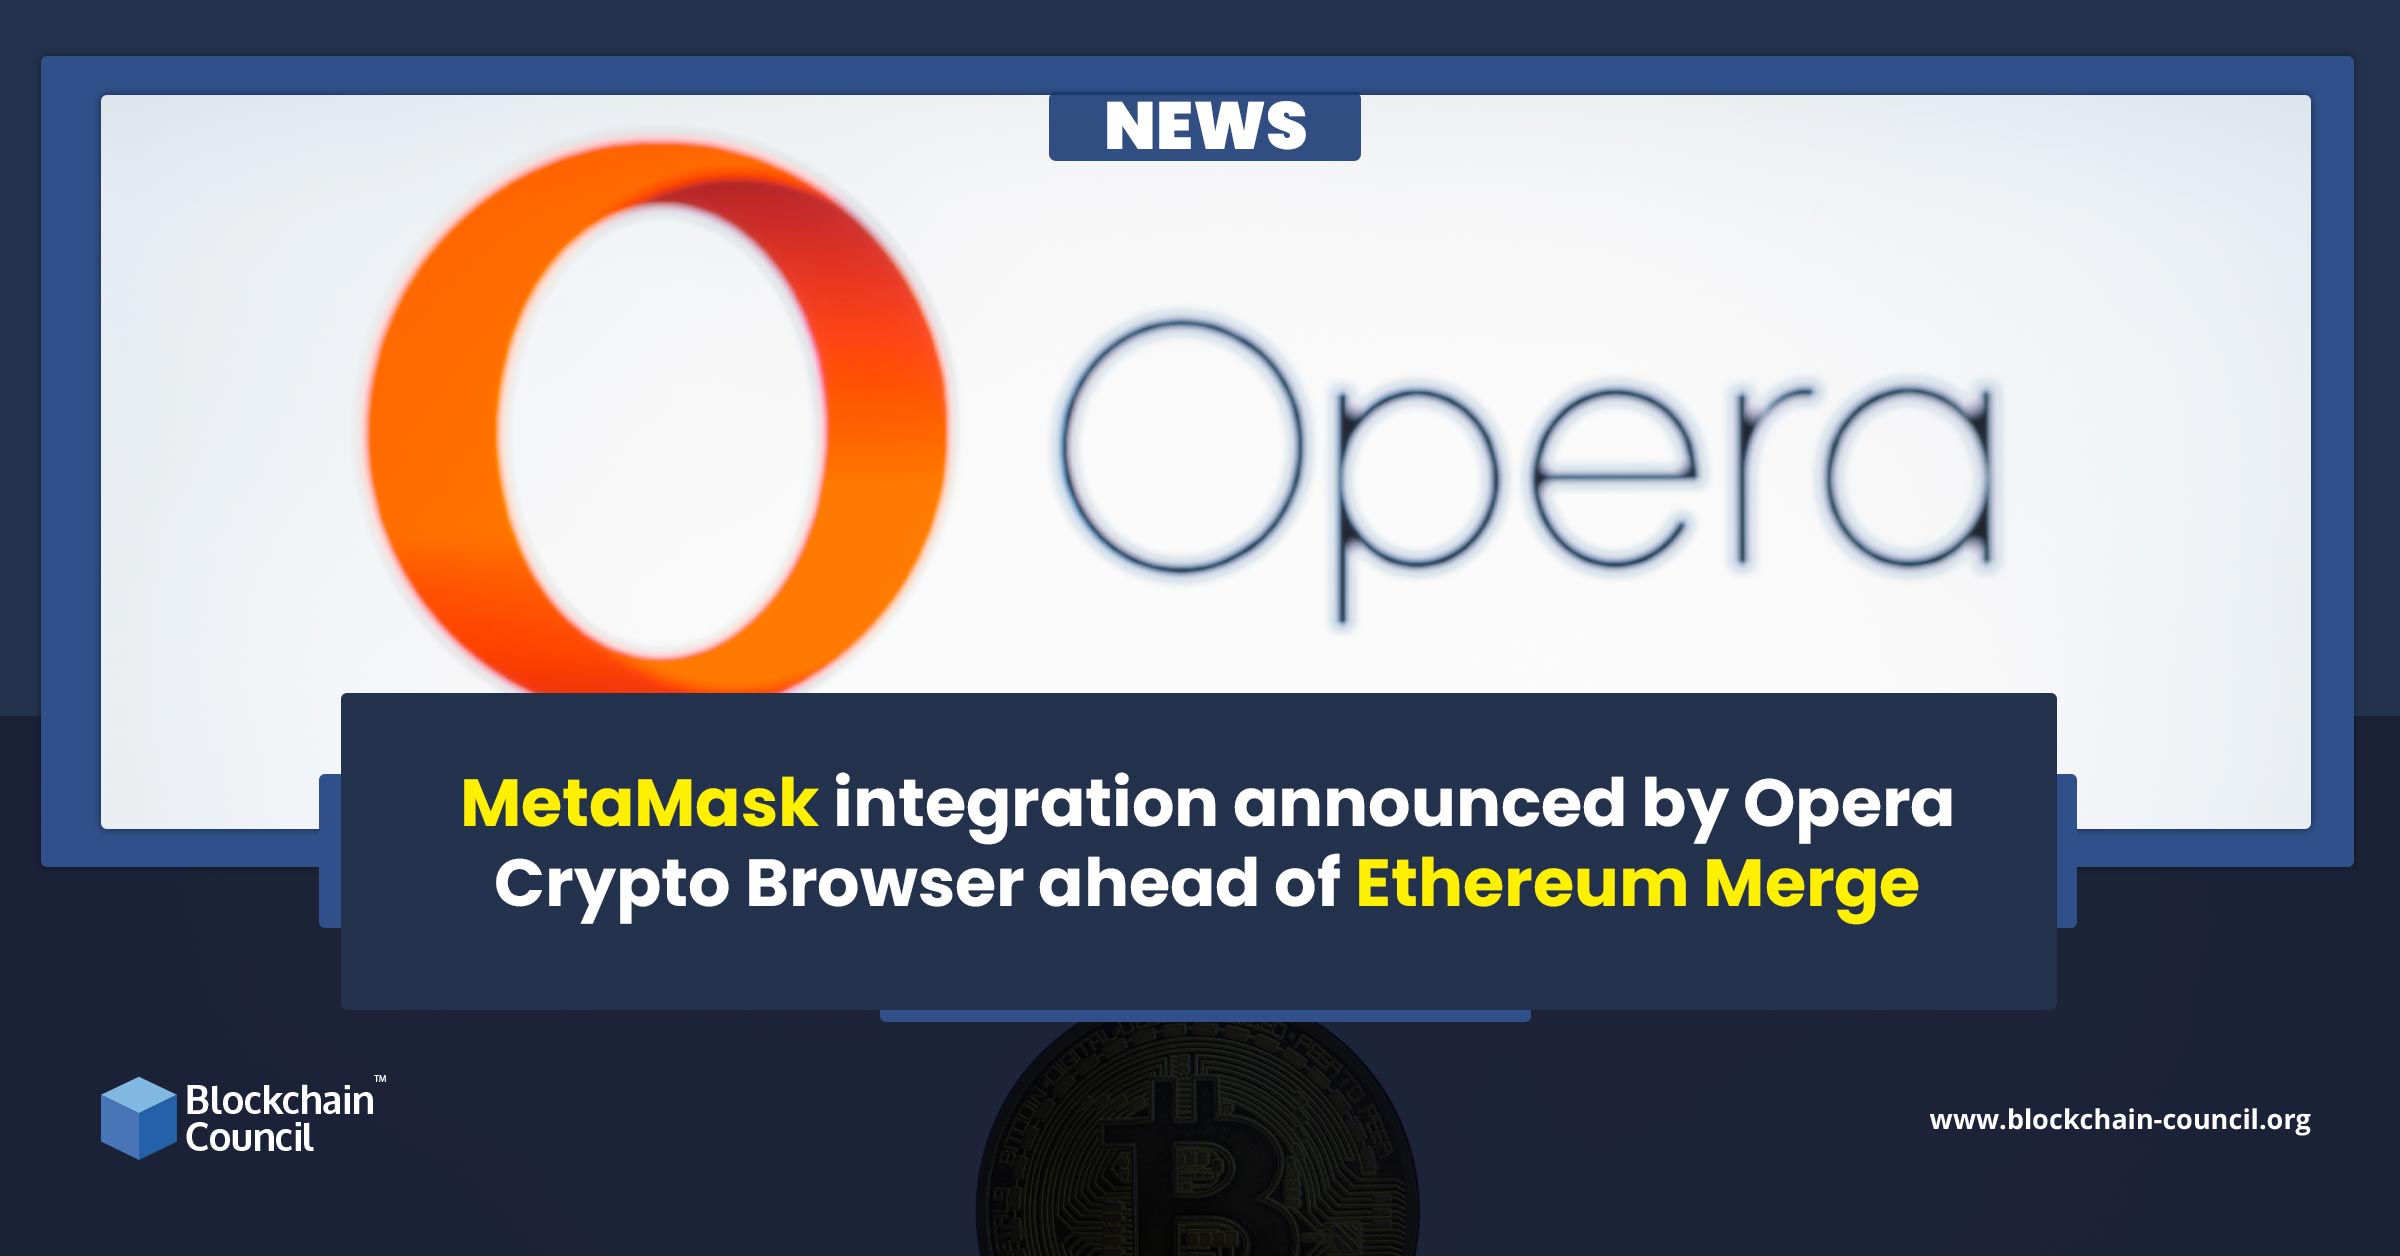 MetaMask integration announced by Opera Crypto Browser ahead of Ethereum Merge